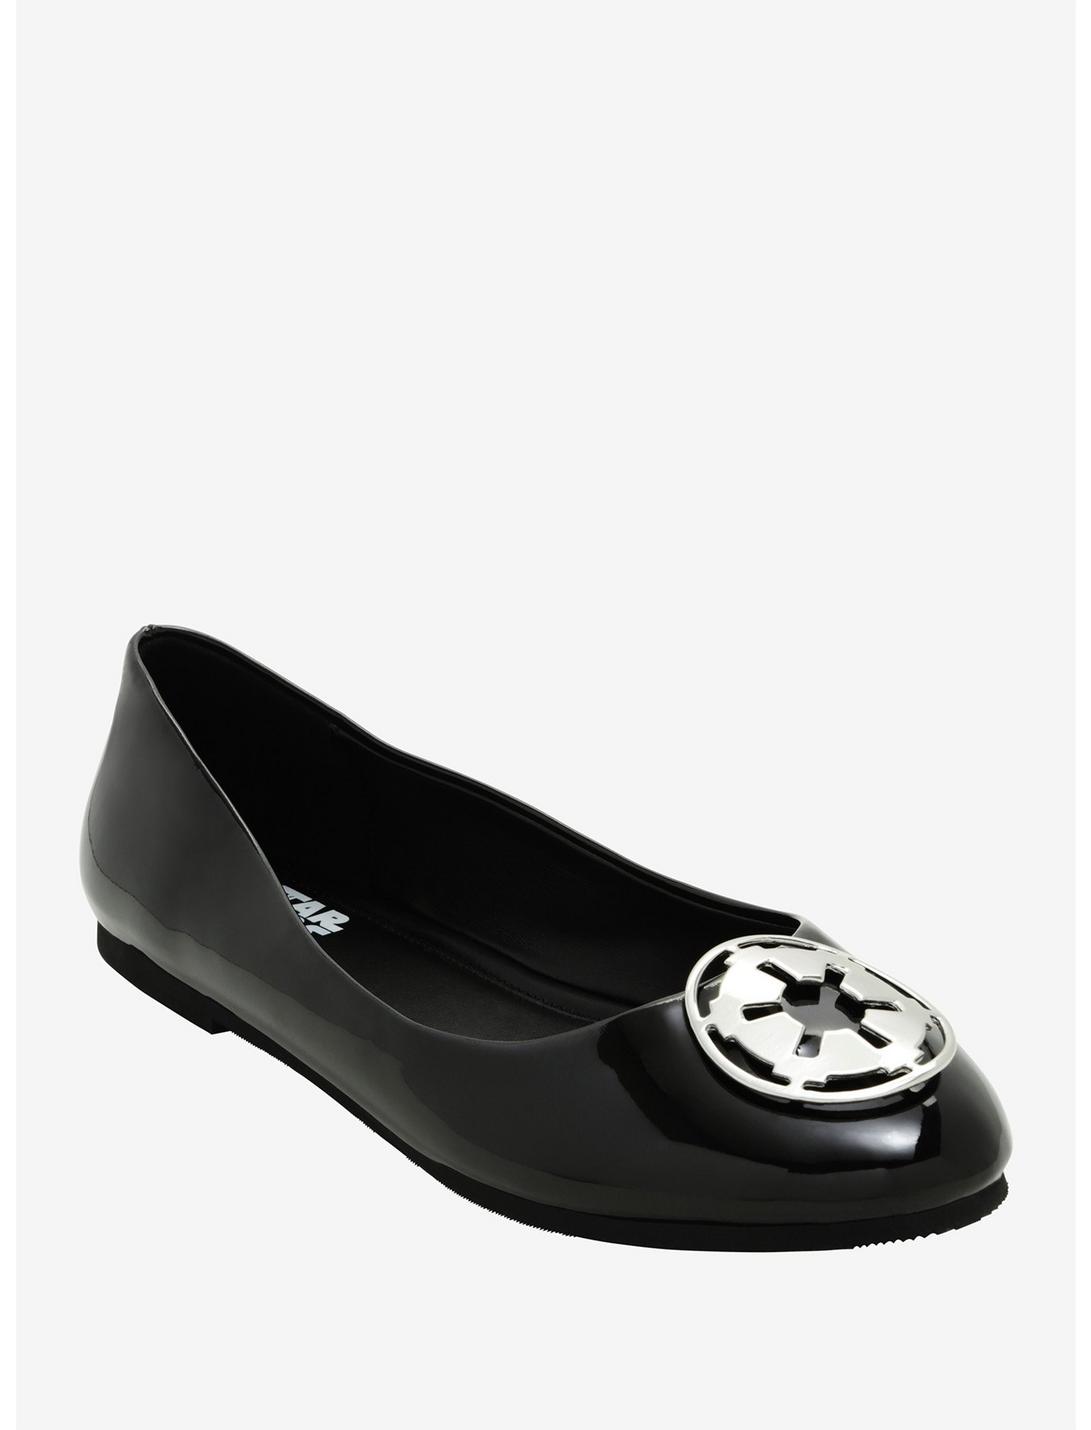 Star Wars Galactic Empire Patent Leather Flats Her Universe Exclusive, BLACK, hi-res